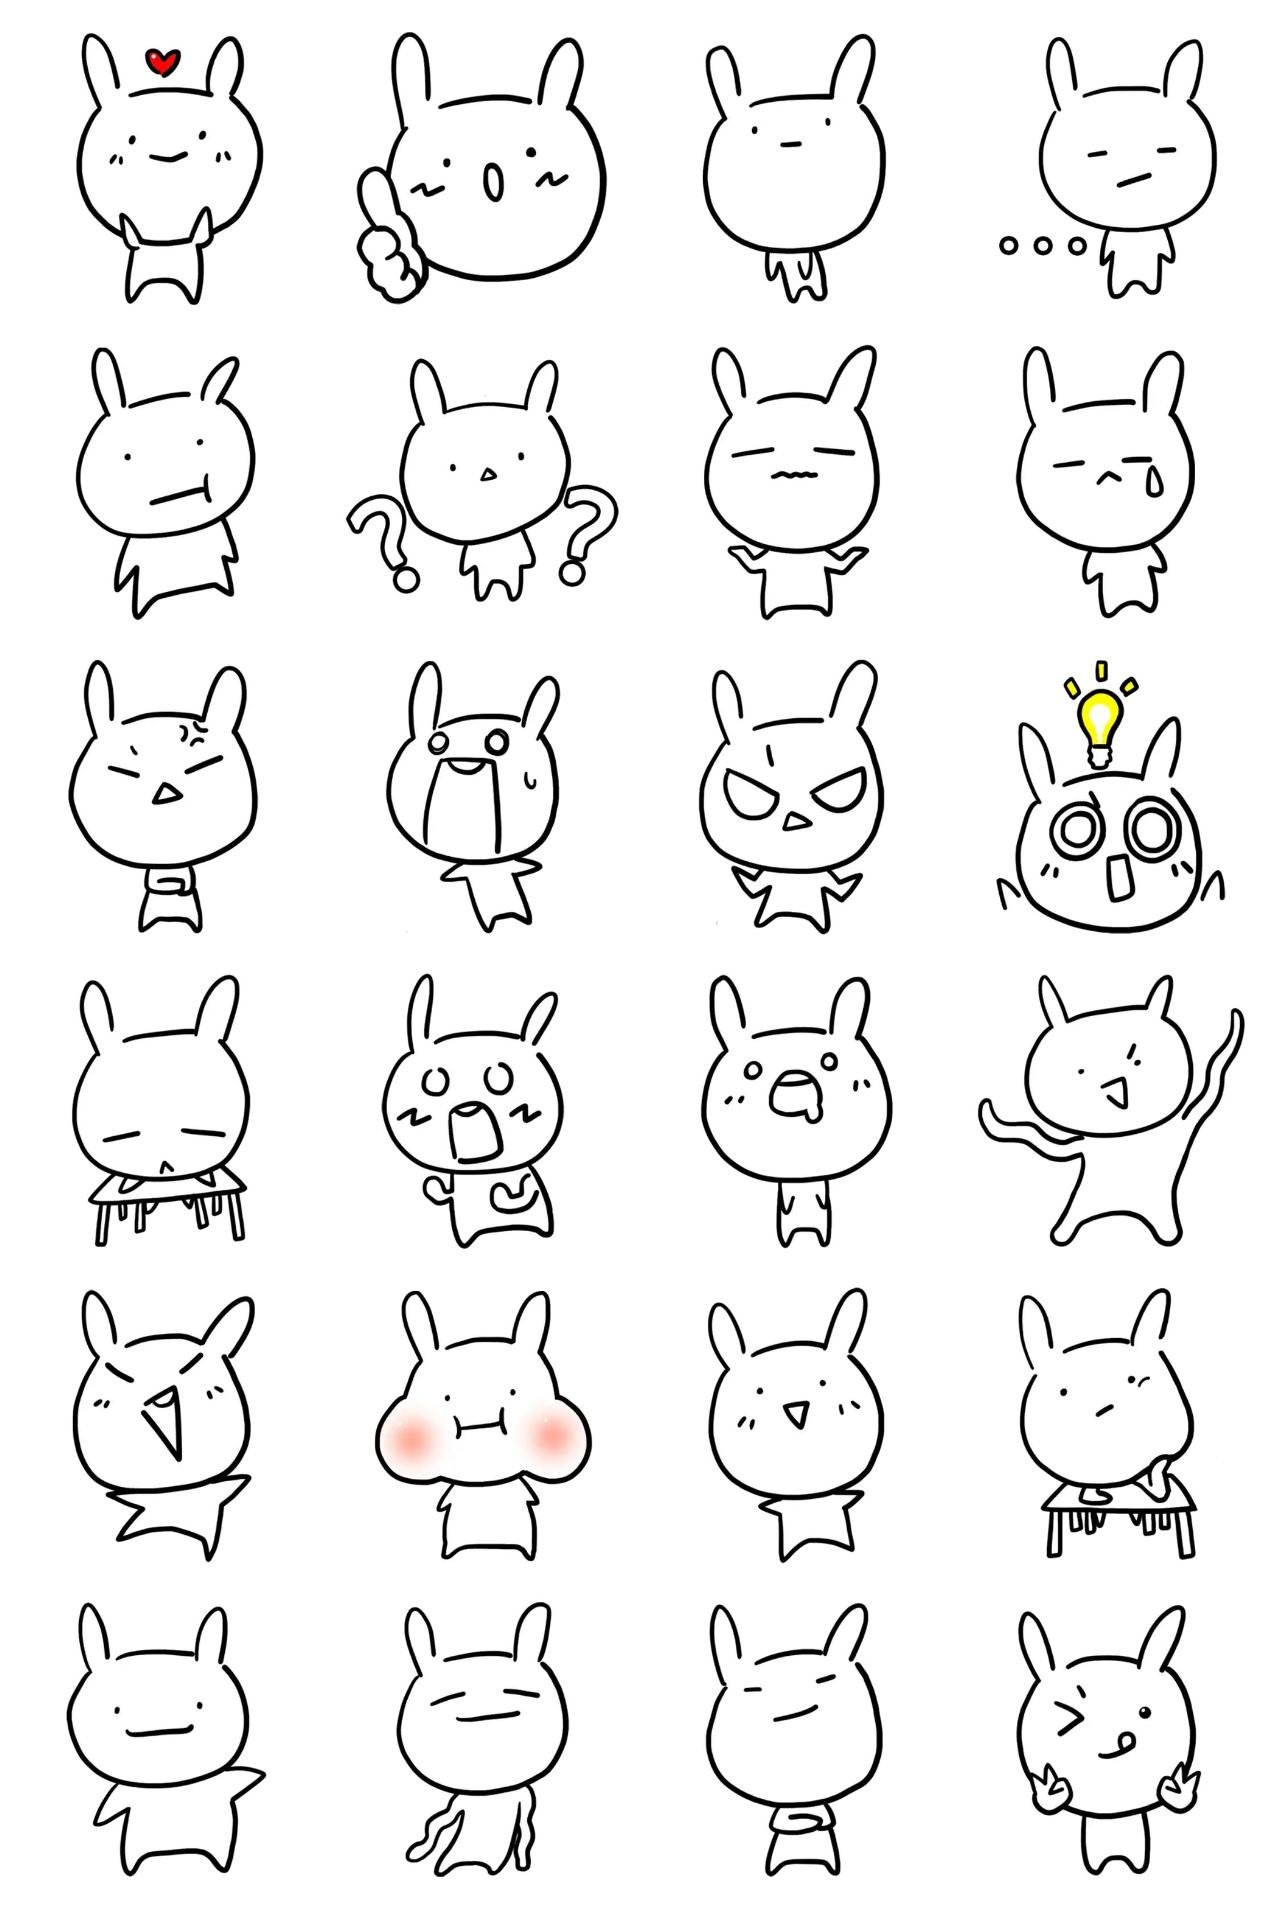 Lovely Cute Rabbit Booboo Animals,Gag sticker pack for Whatsapp, Telegram, Signal, and others chatting and message apps